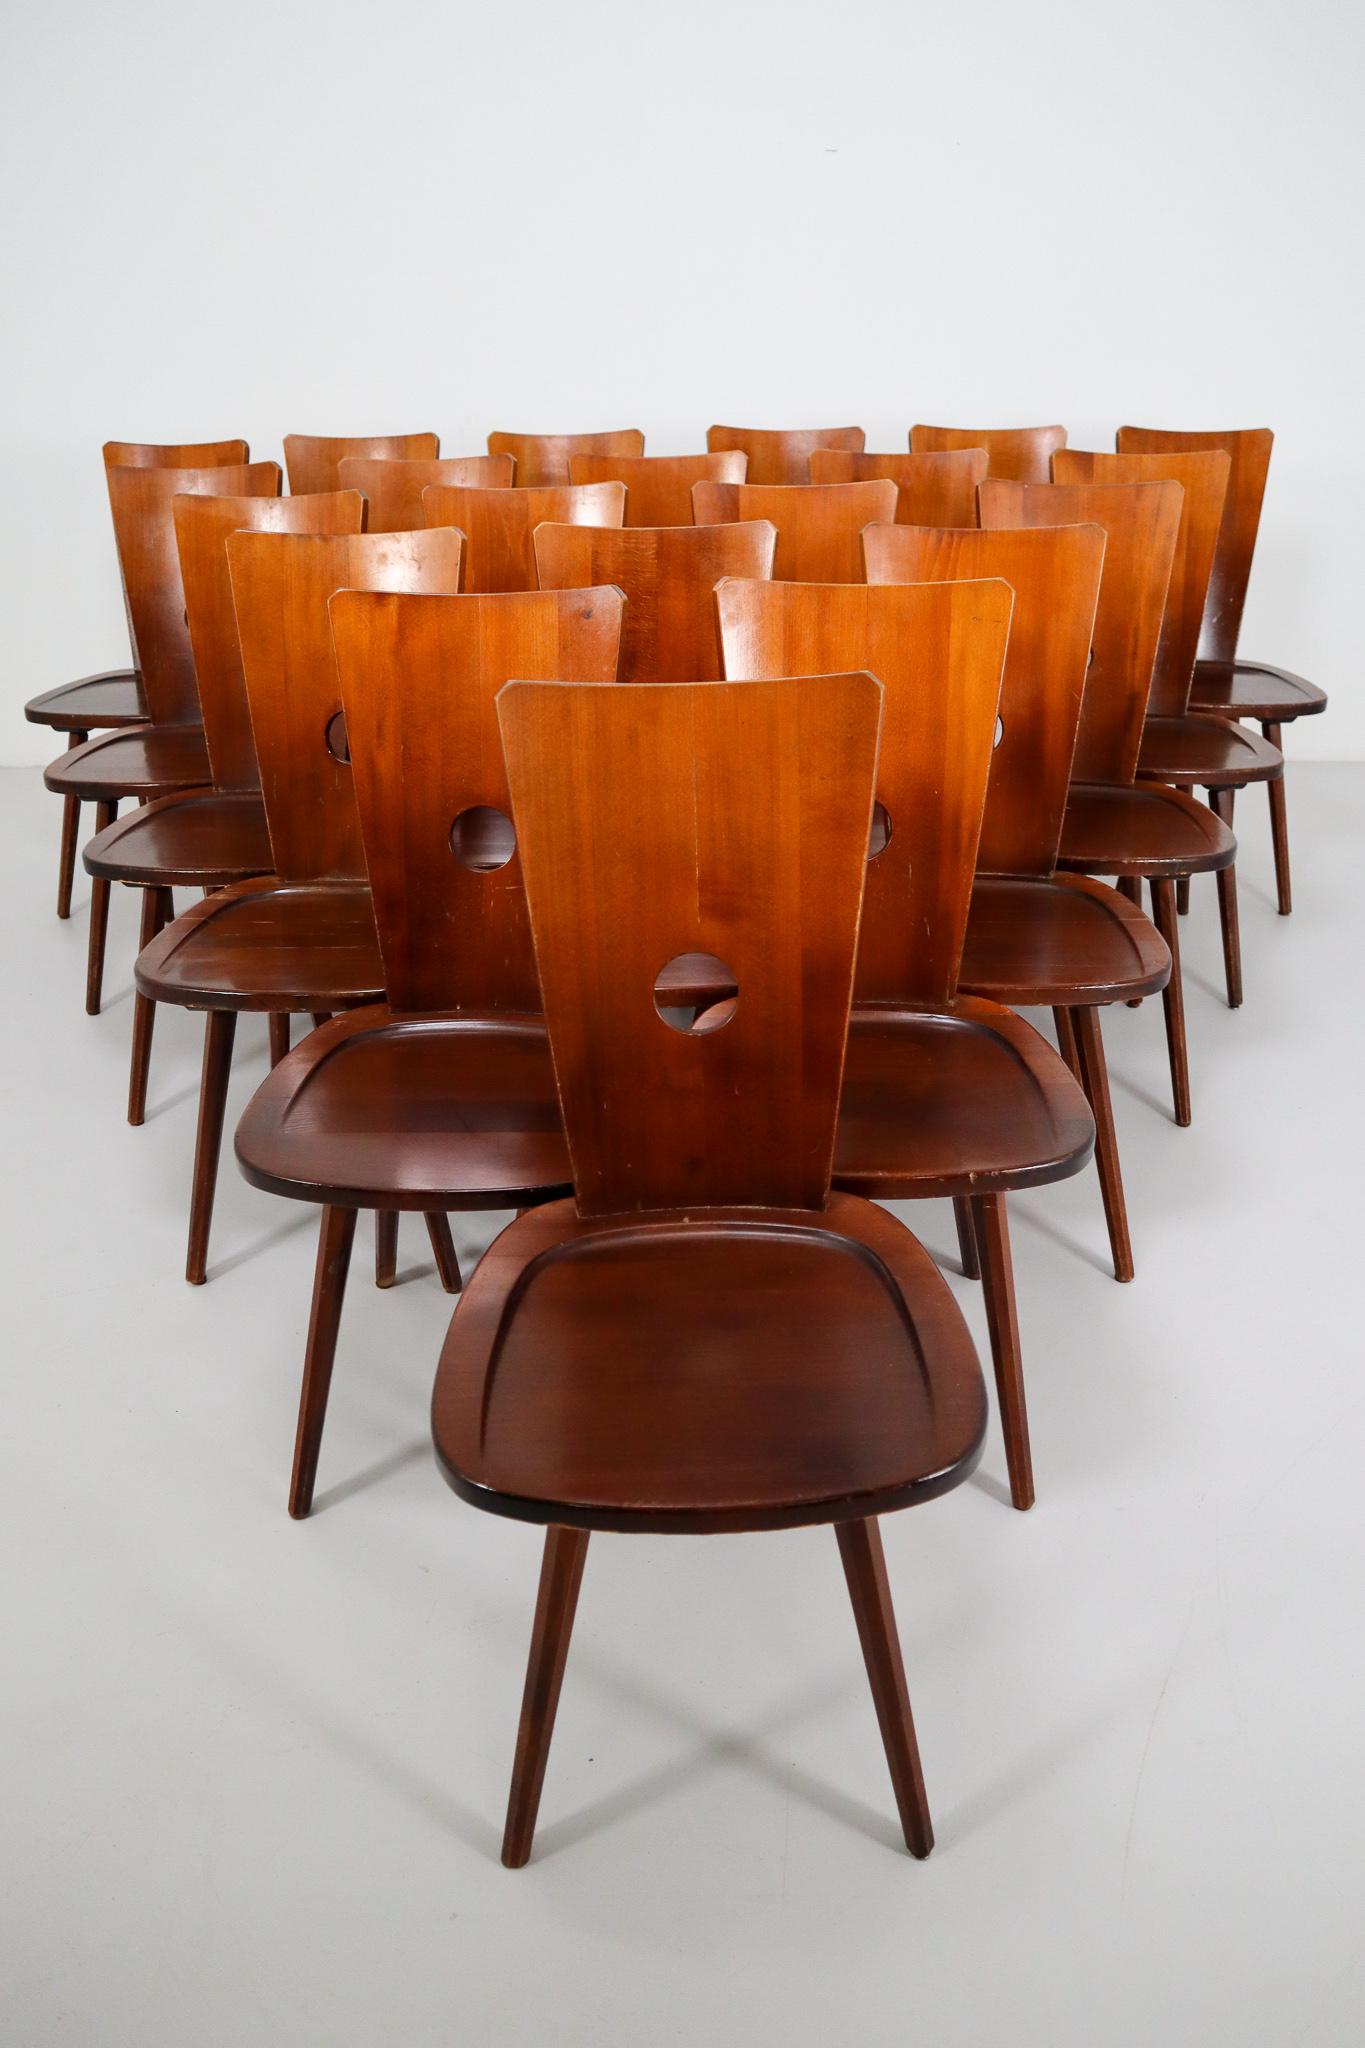 Set of 22 Primitive French Wooden Chairs in the Style of Olavi Hanninen, 1950s 1